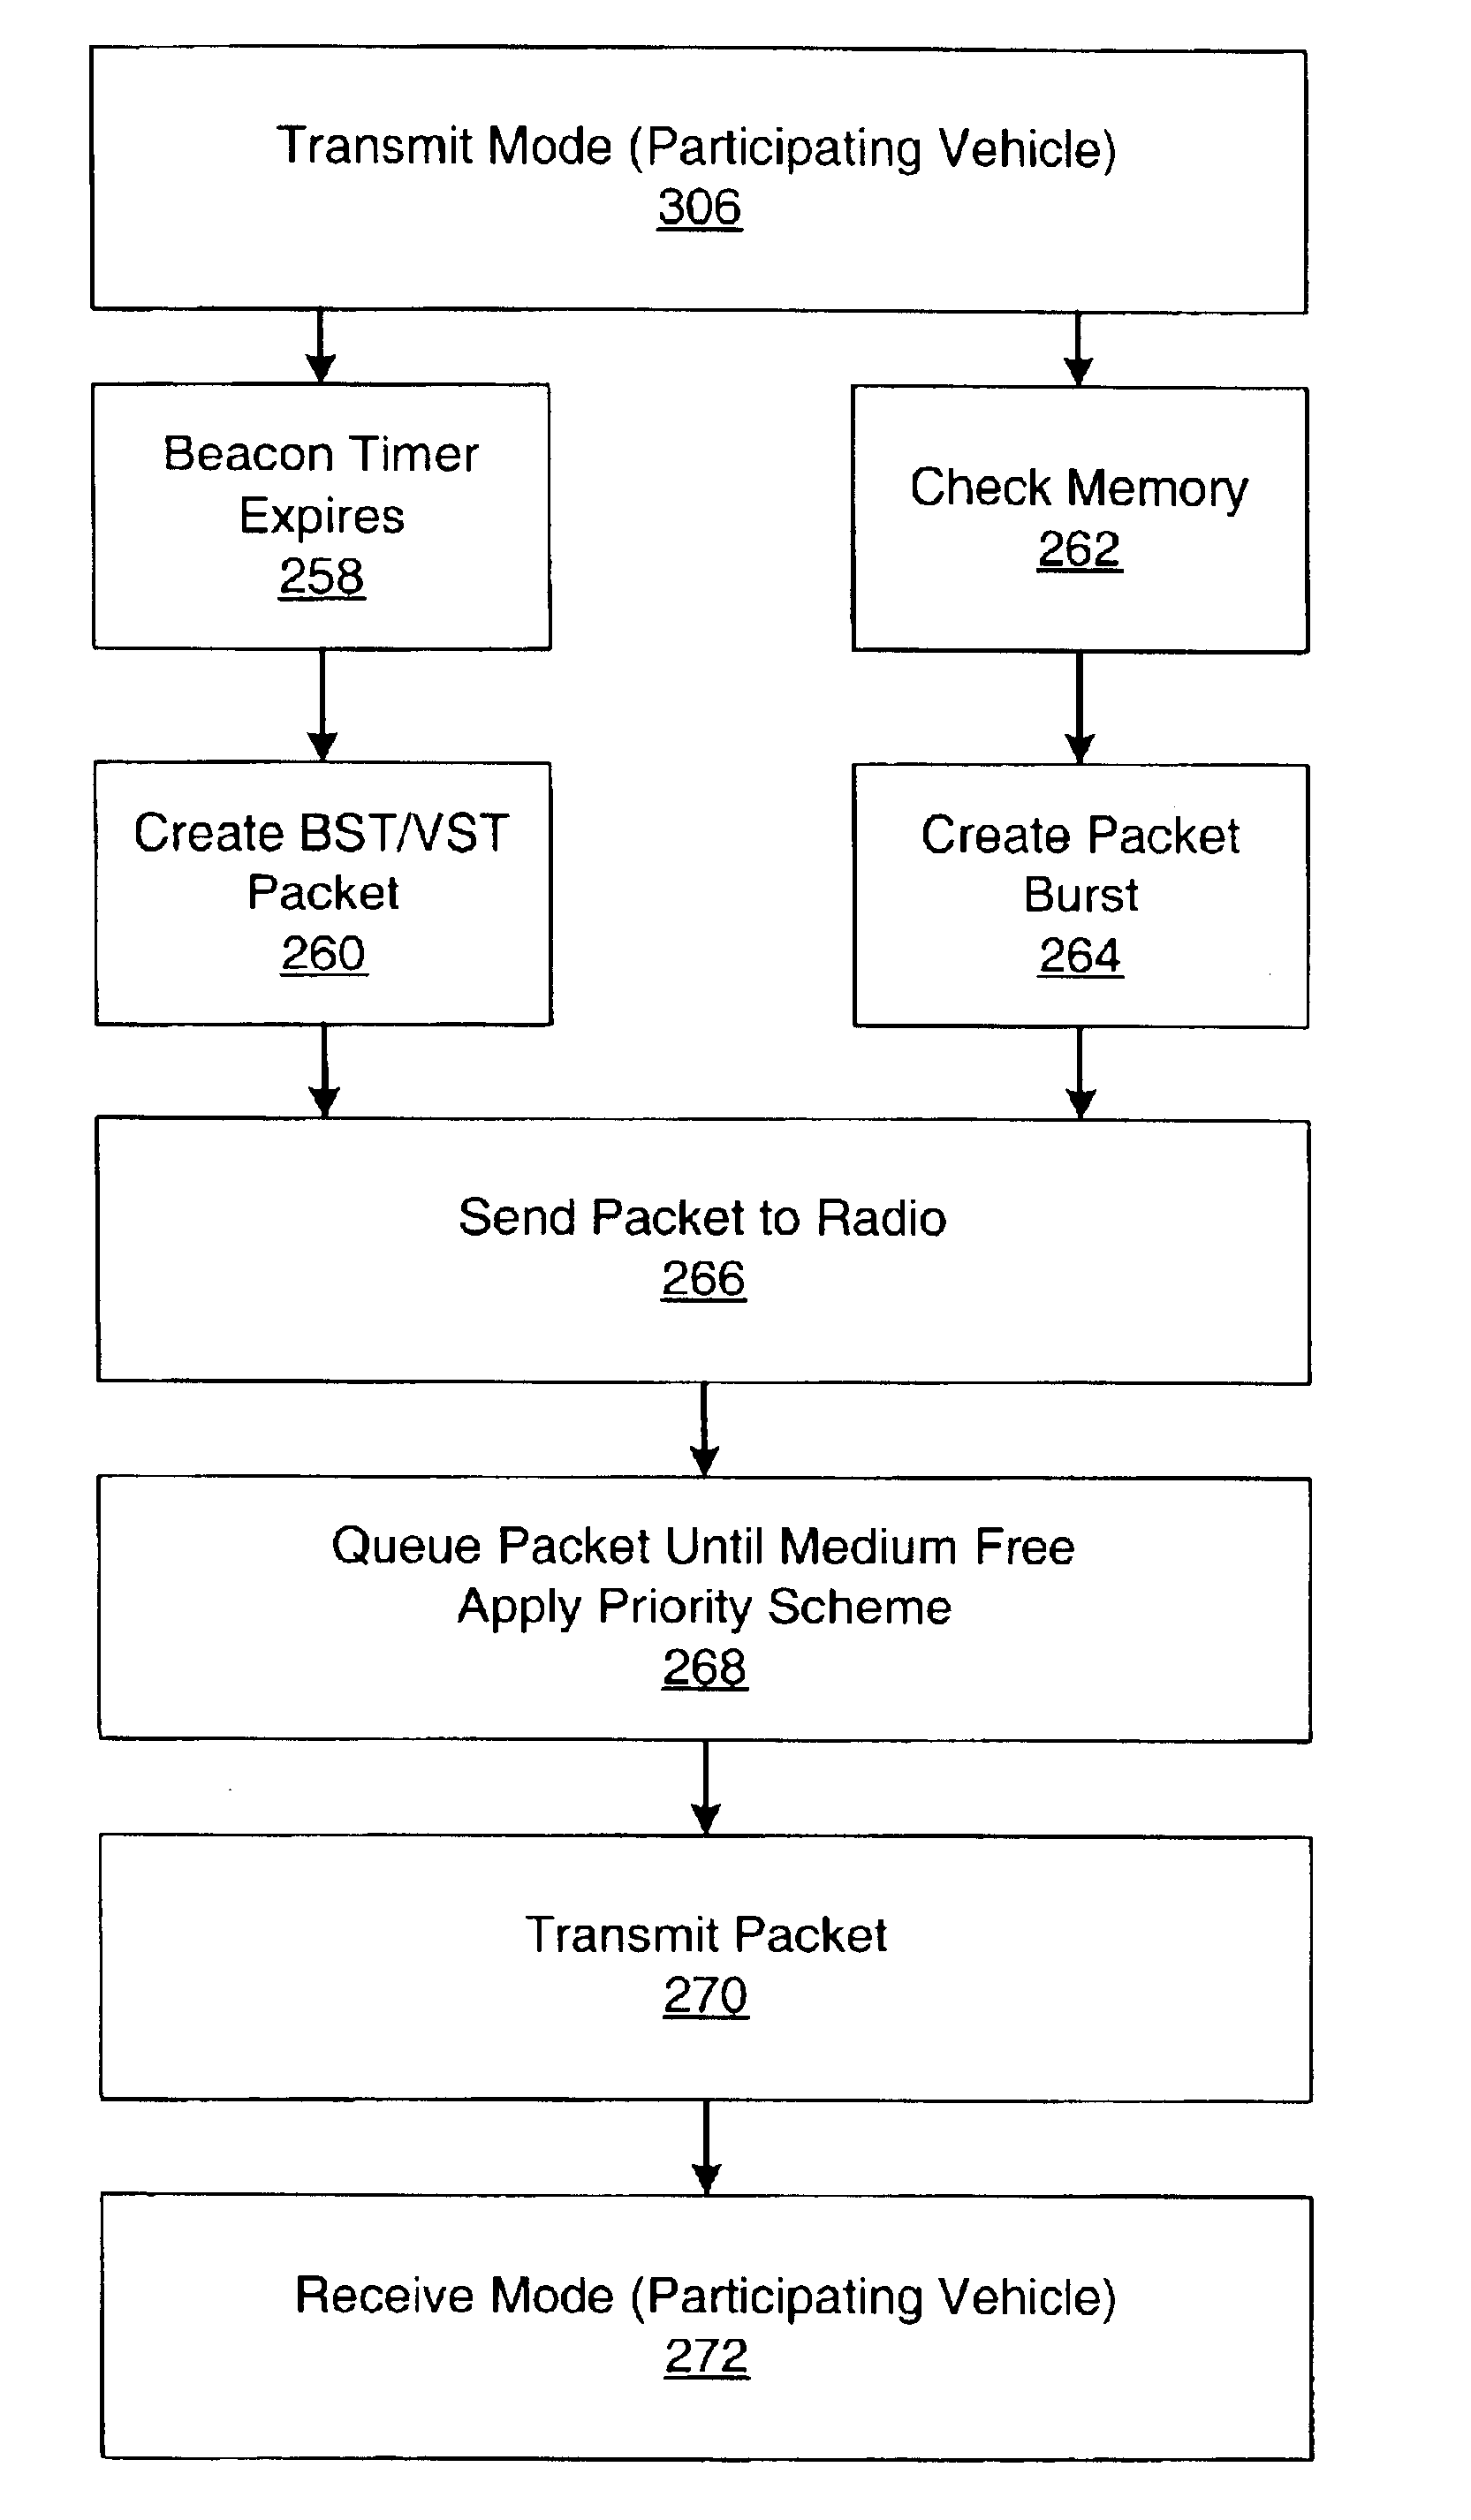 Methods for communicating between elements in a hierarchical floating car data network